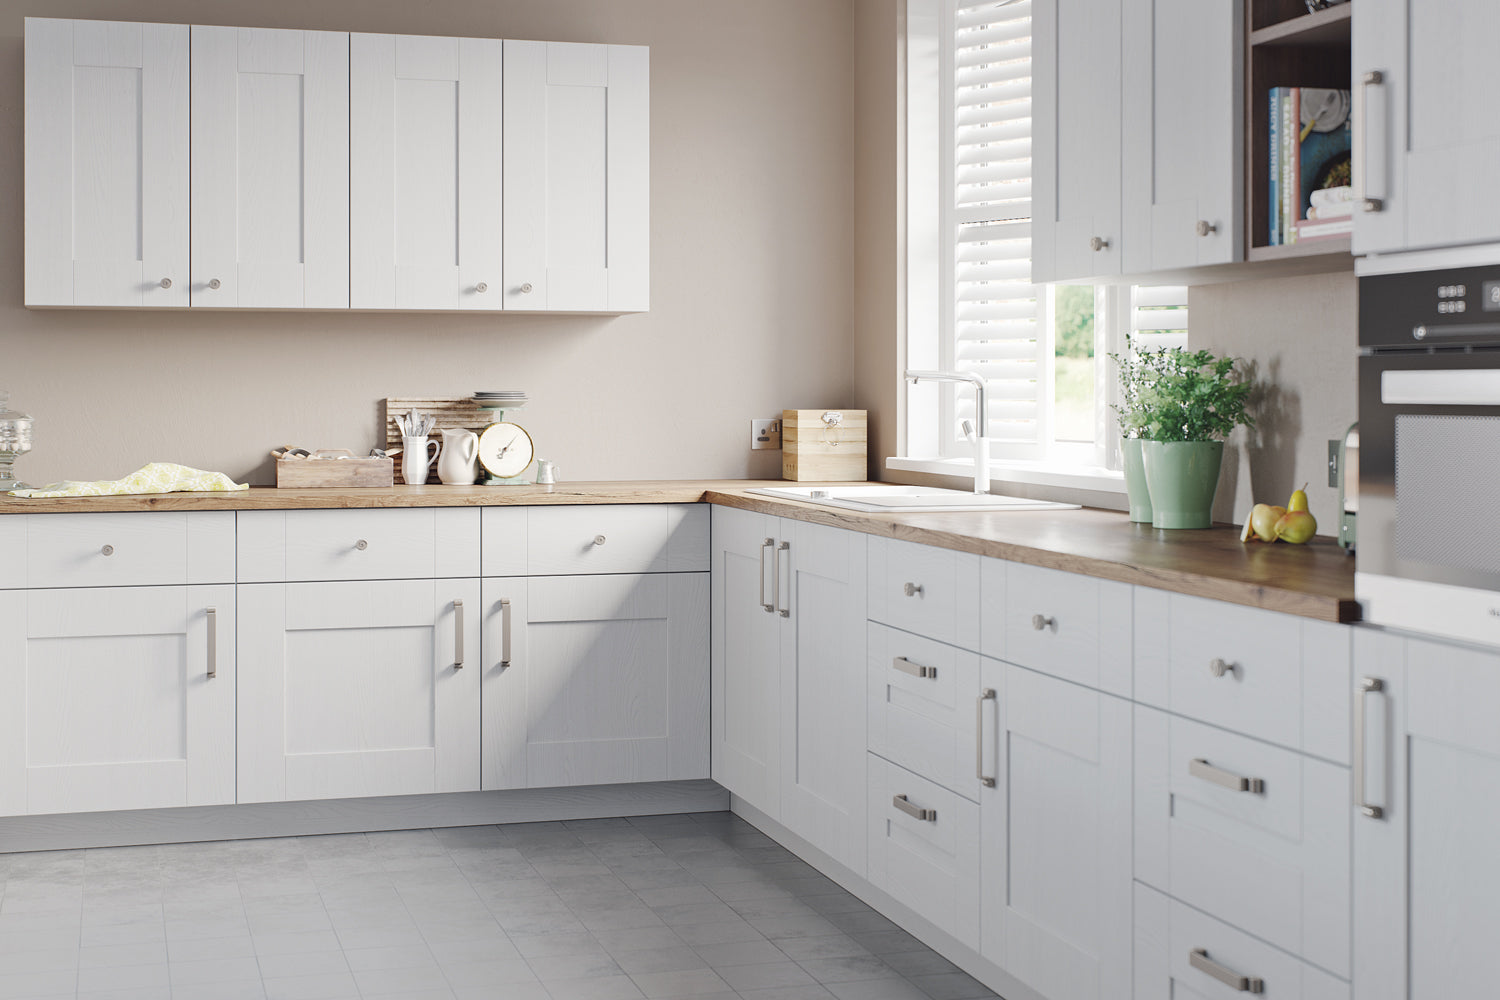 Light grey kitchen with shaker style cupboard doors